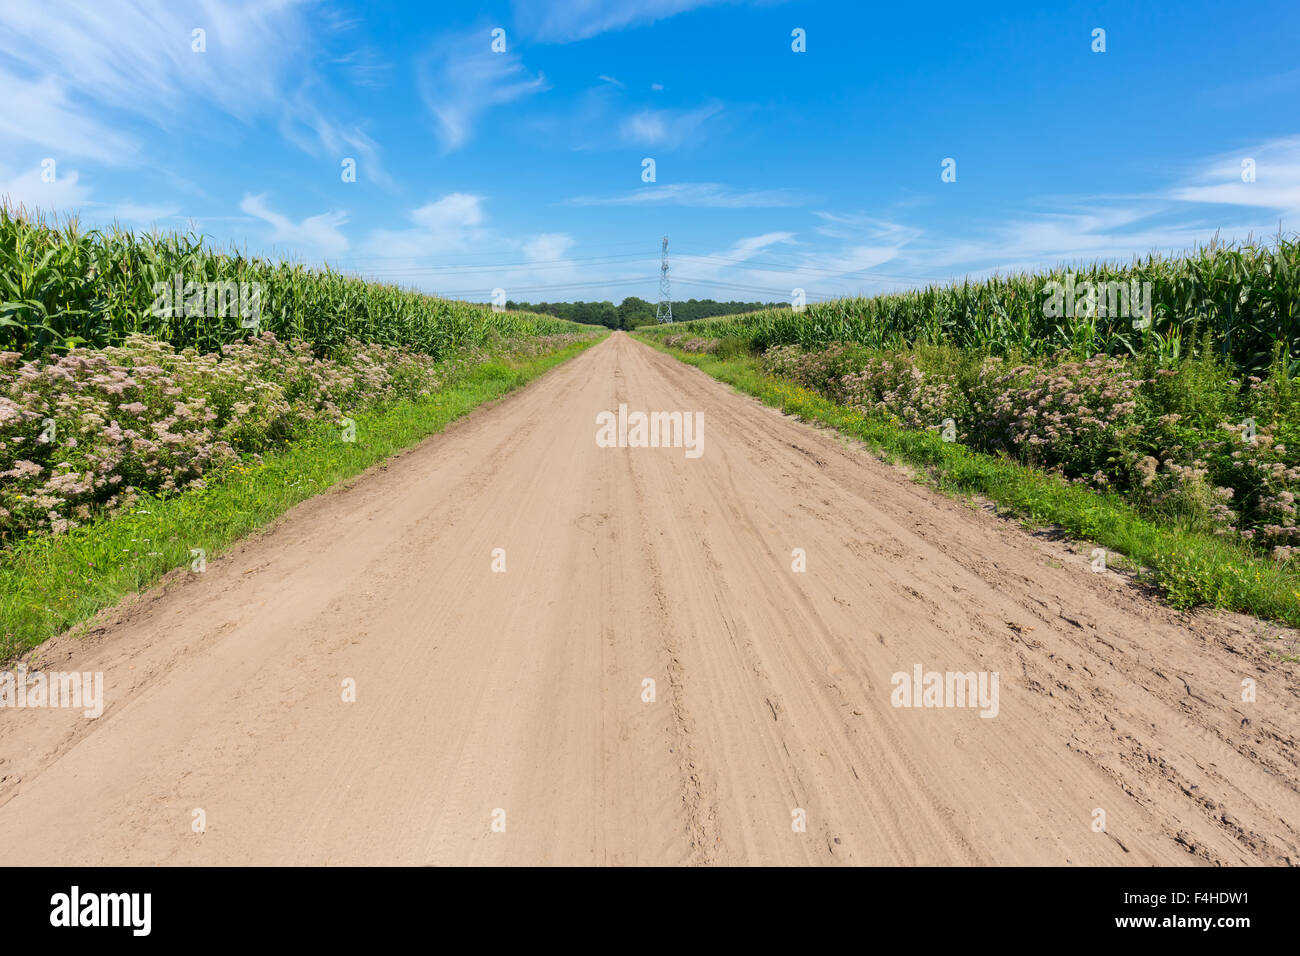 Rural agricultural area with sand road and corn fields at both sides Stock Photo